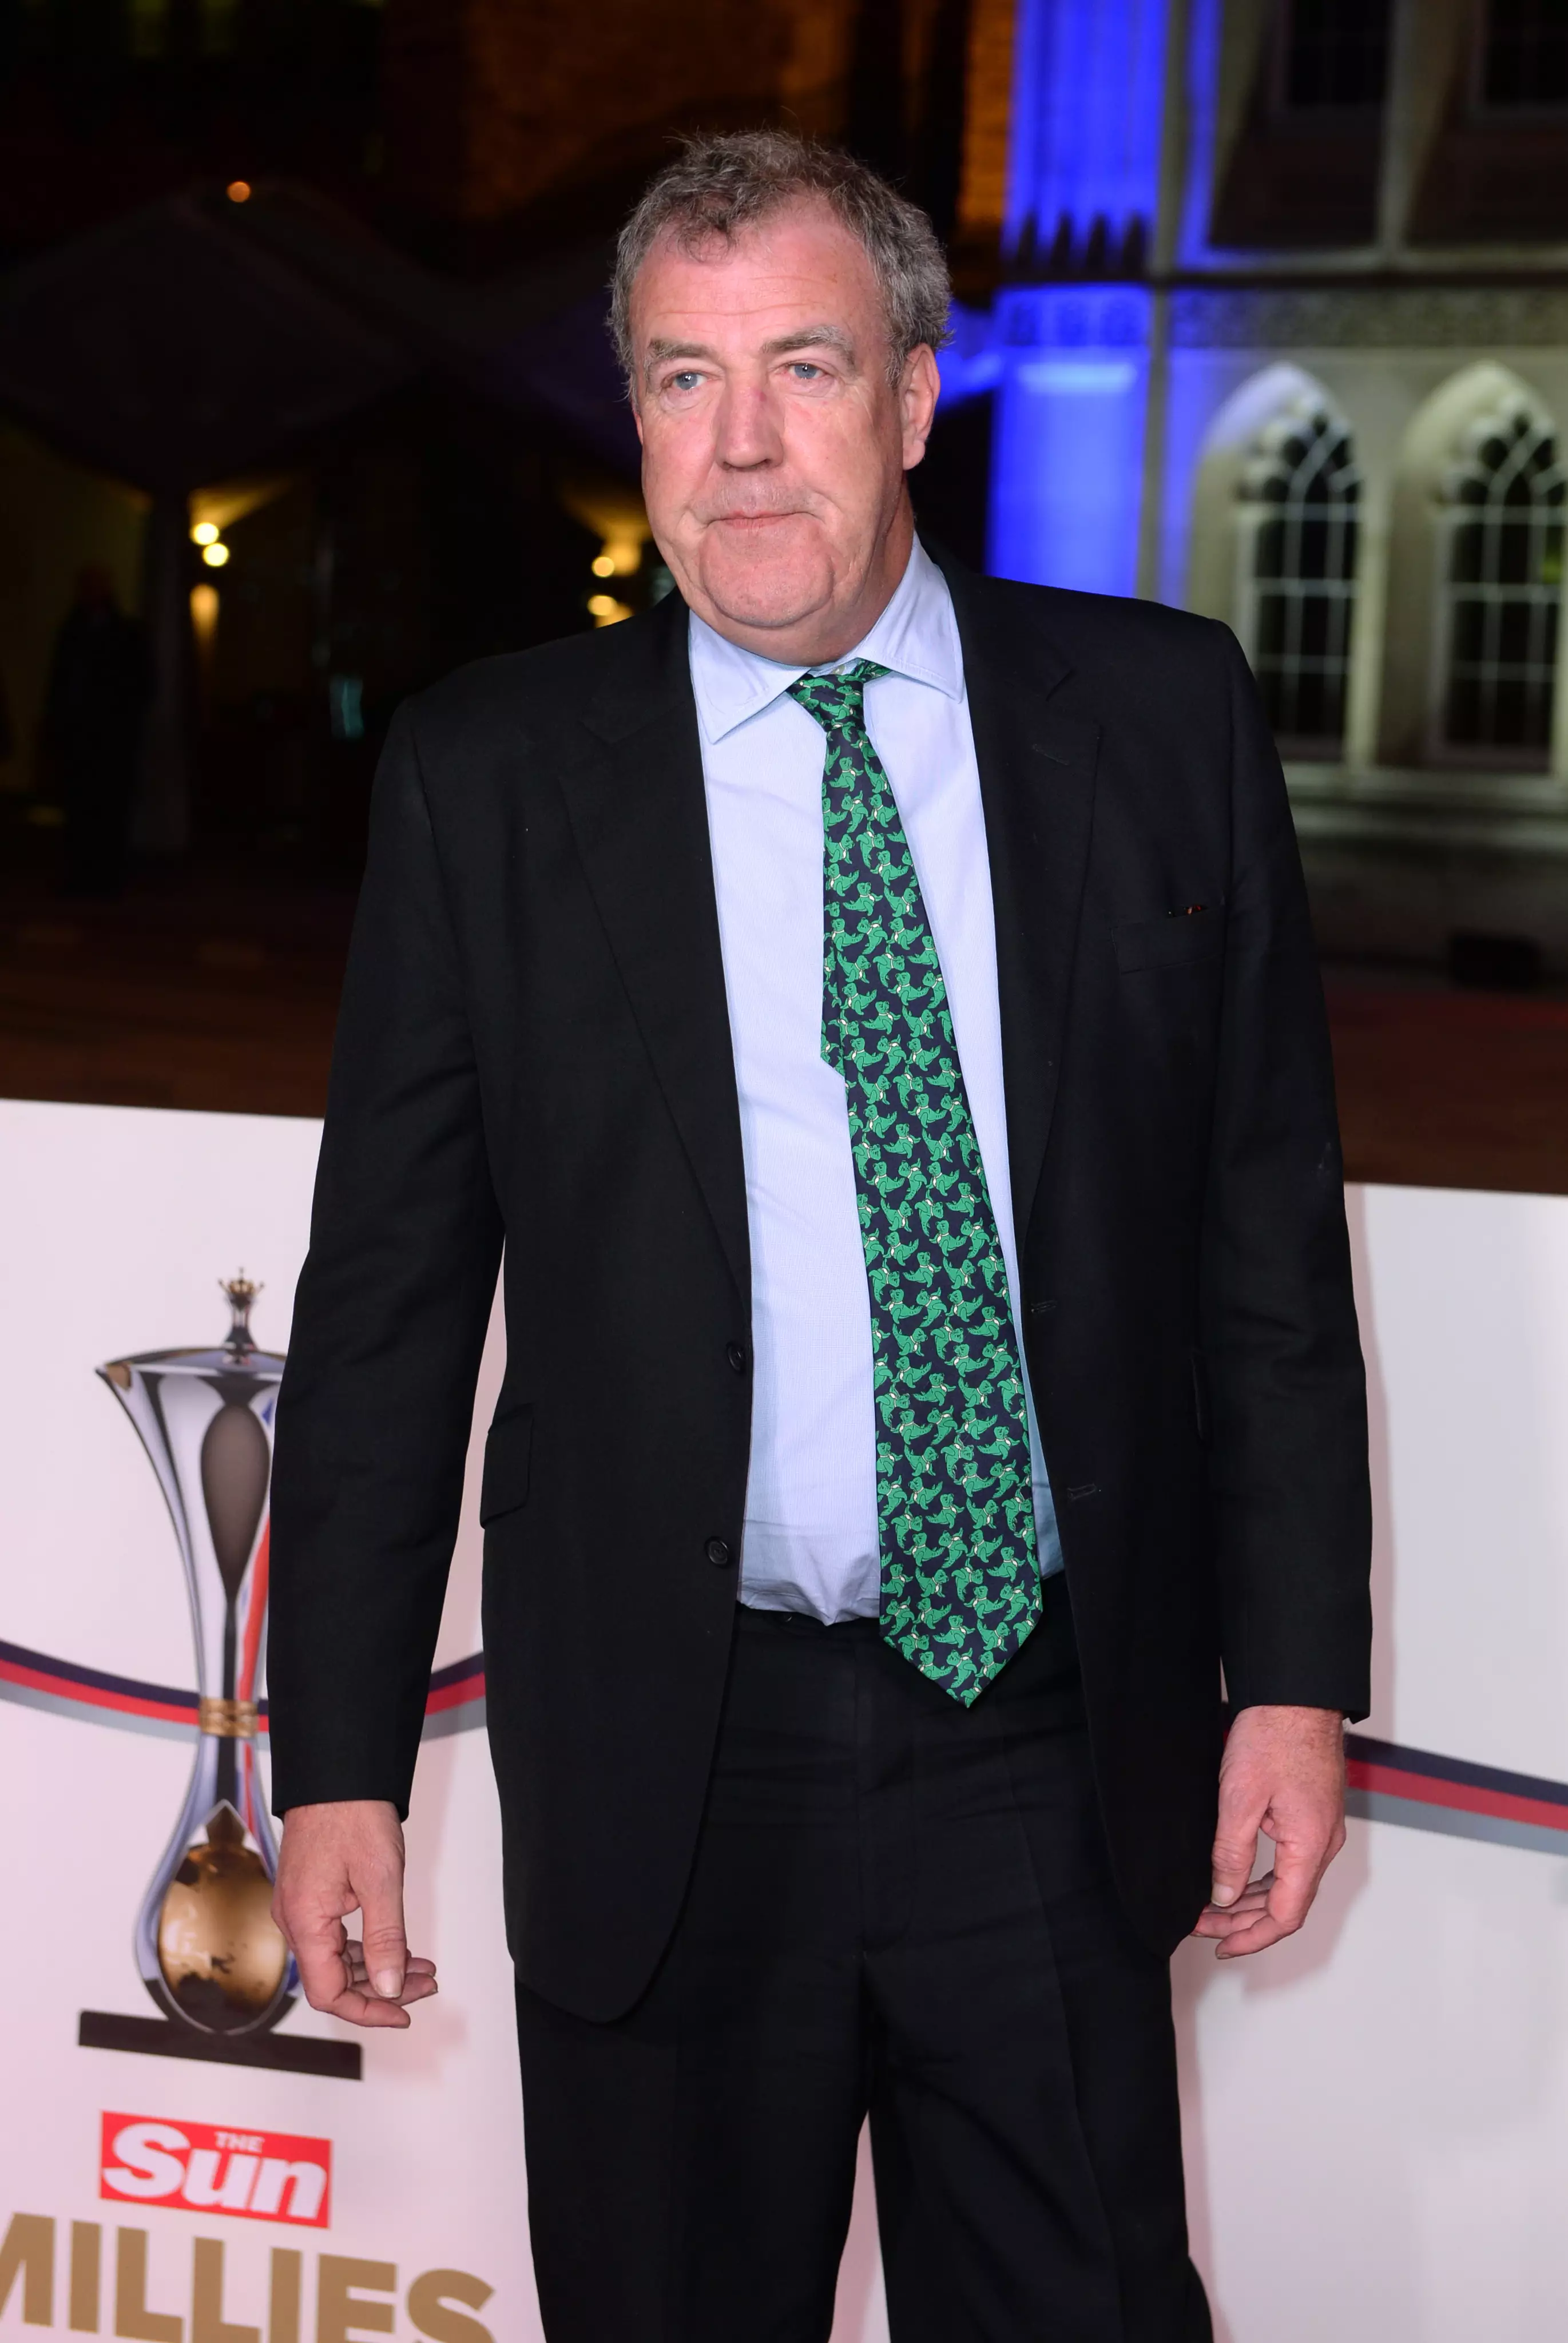 Jeremy Clarkson revealed that he was bullied as a child.